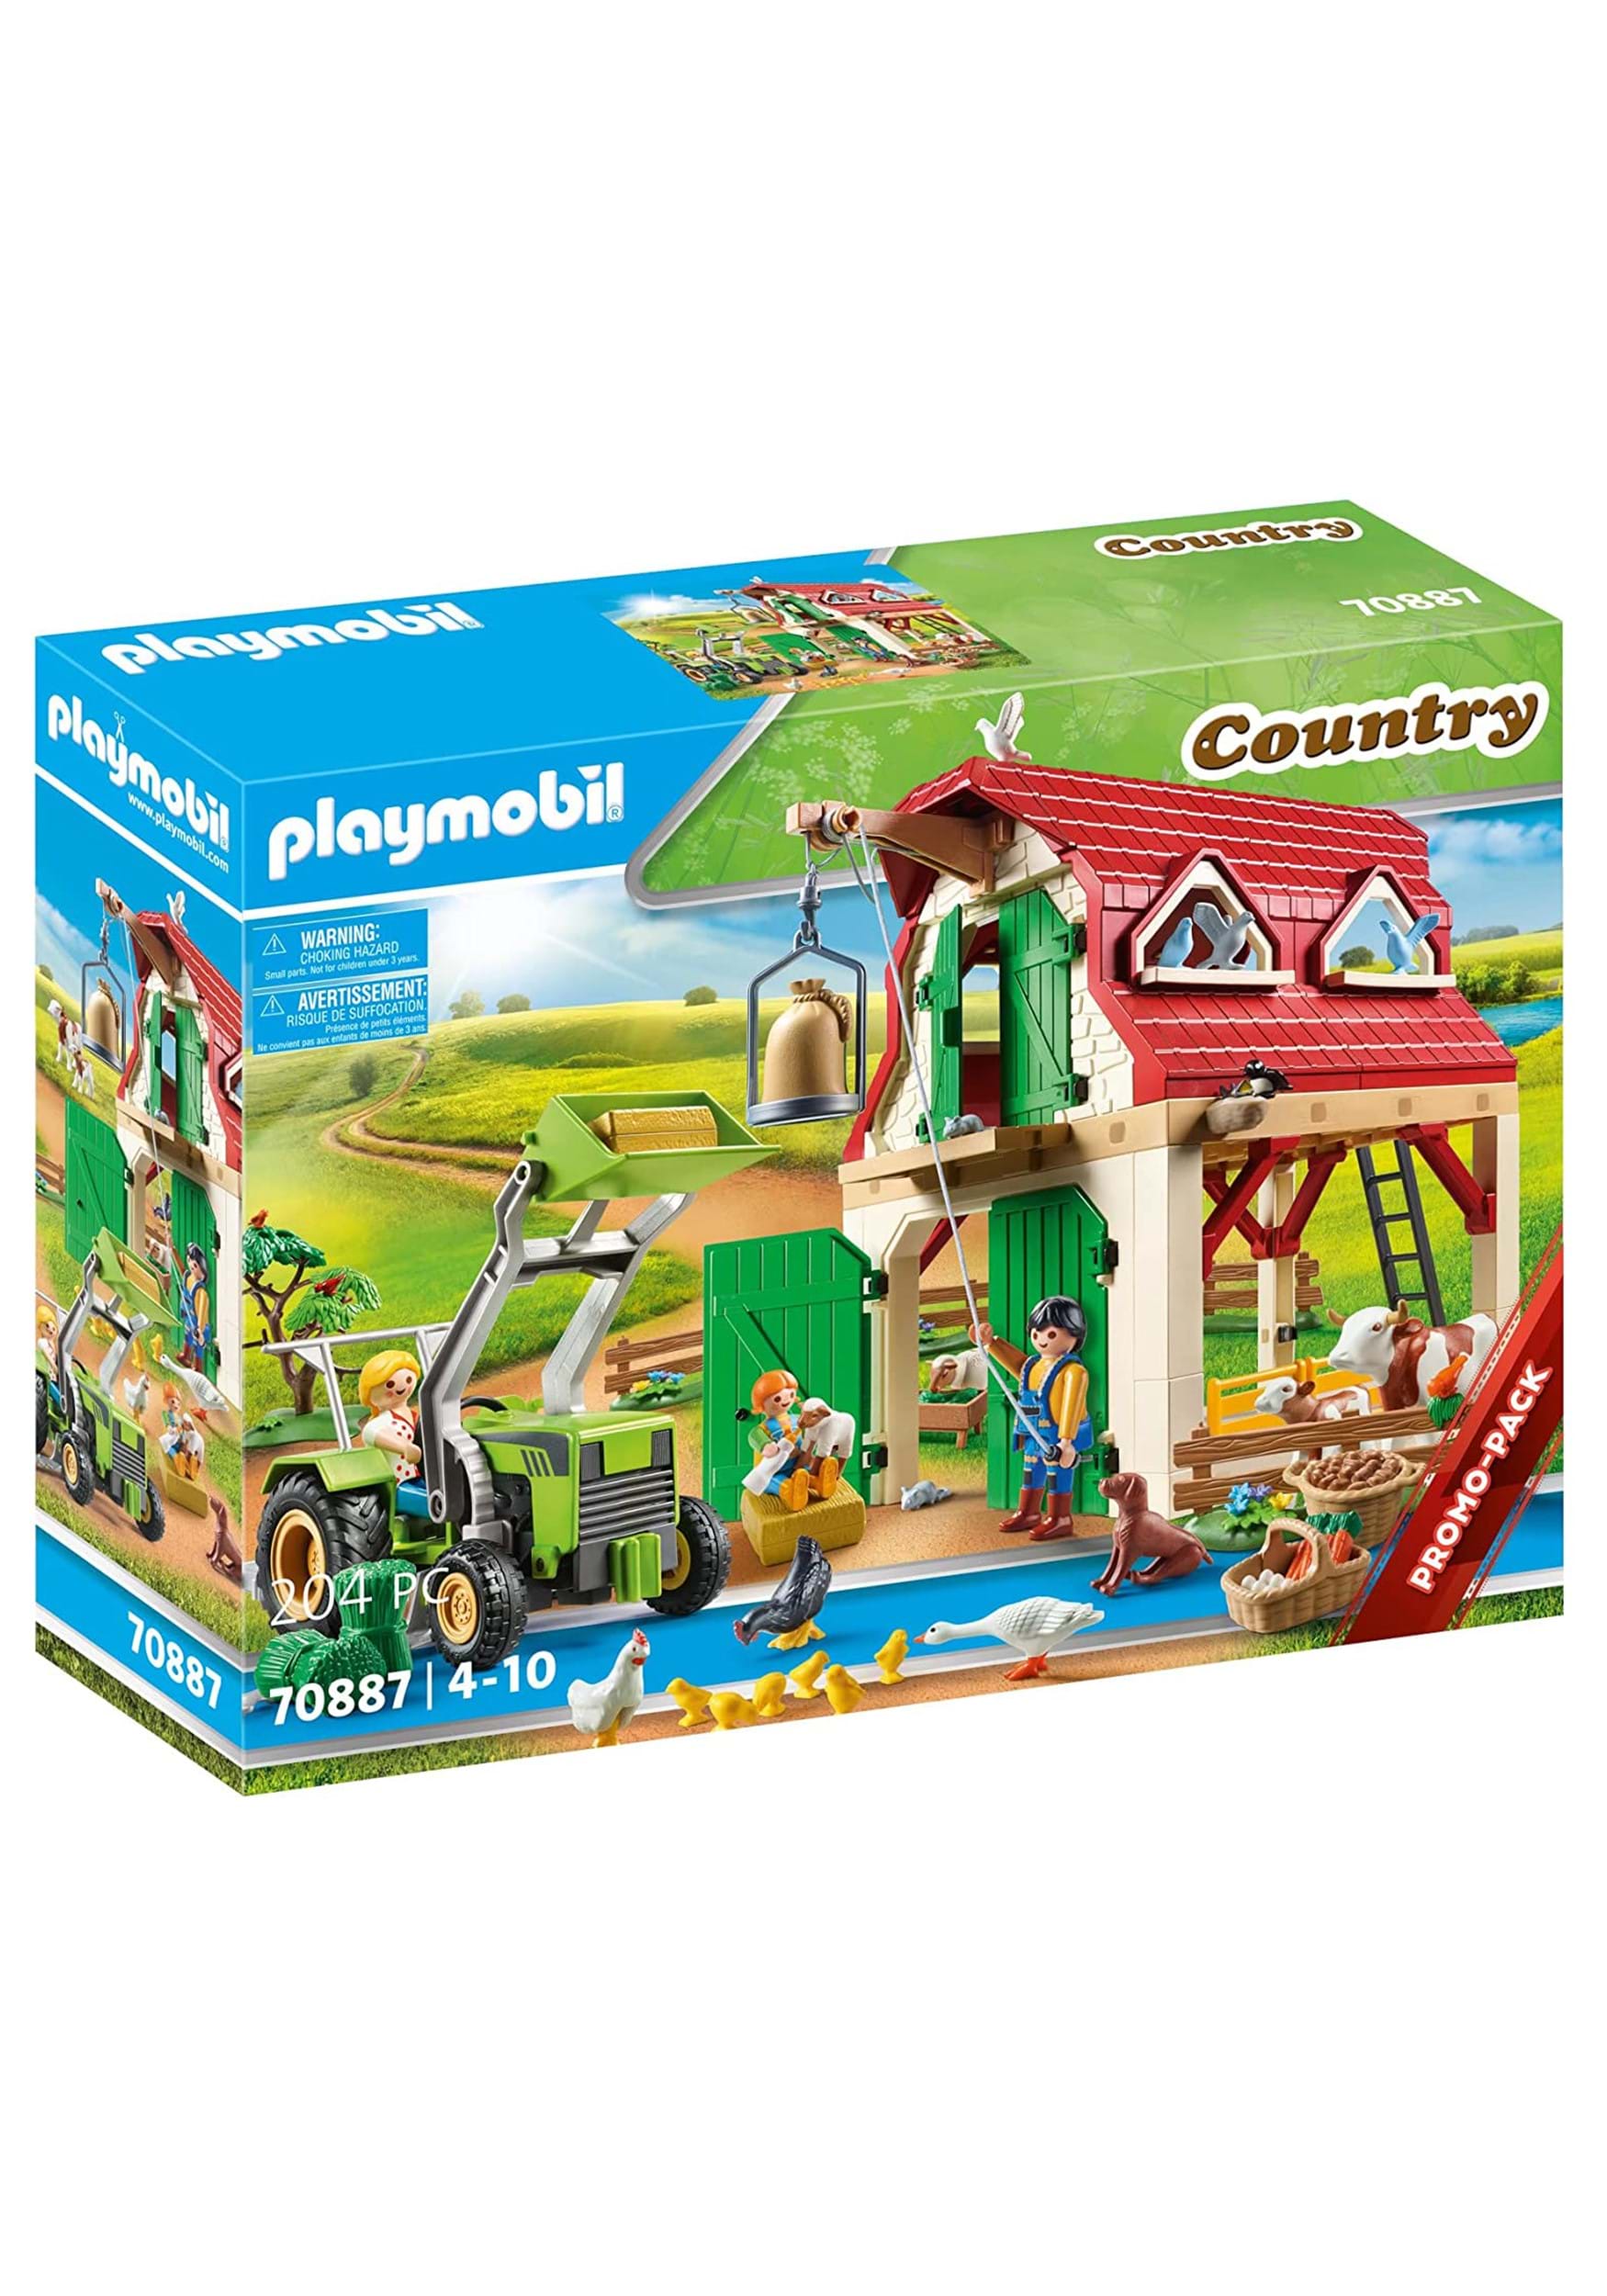 Playmobil Country Farm with Small Animals Building Set